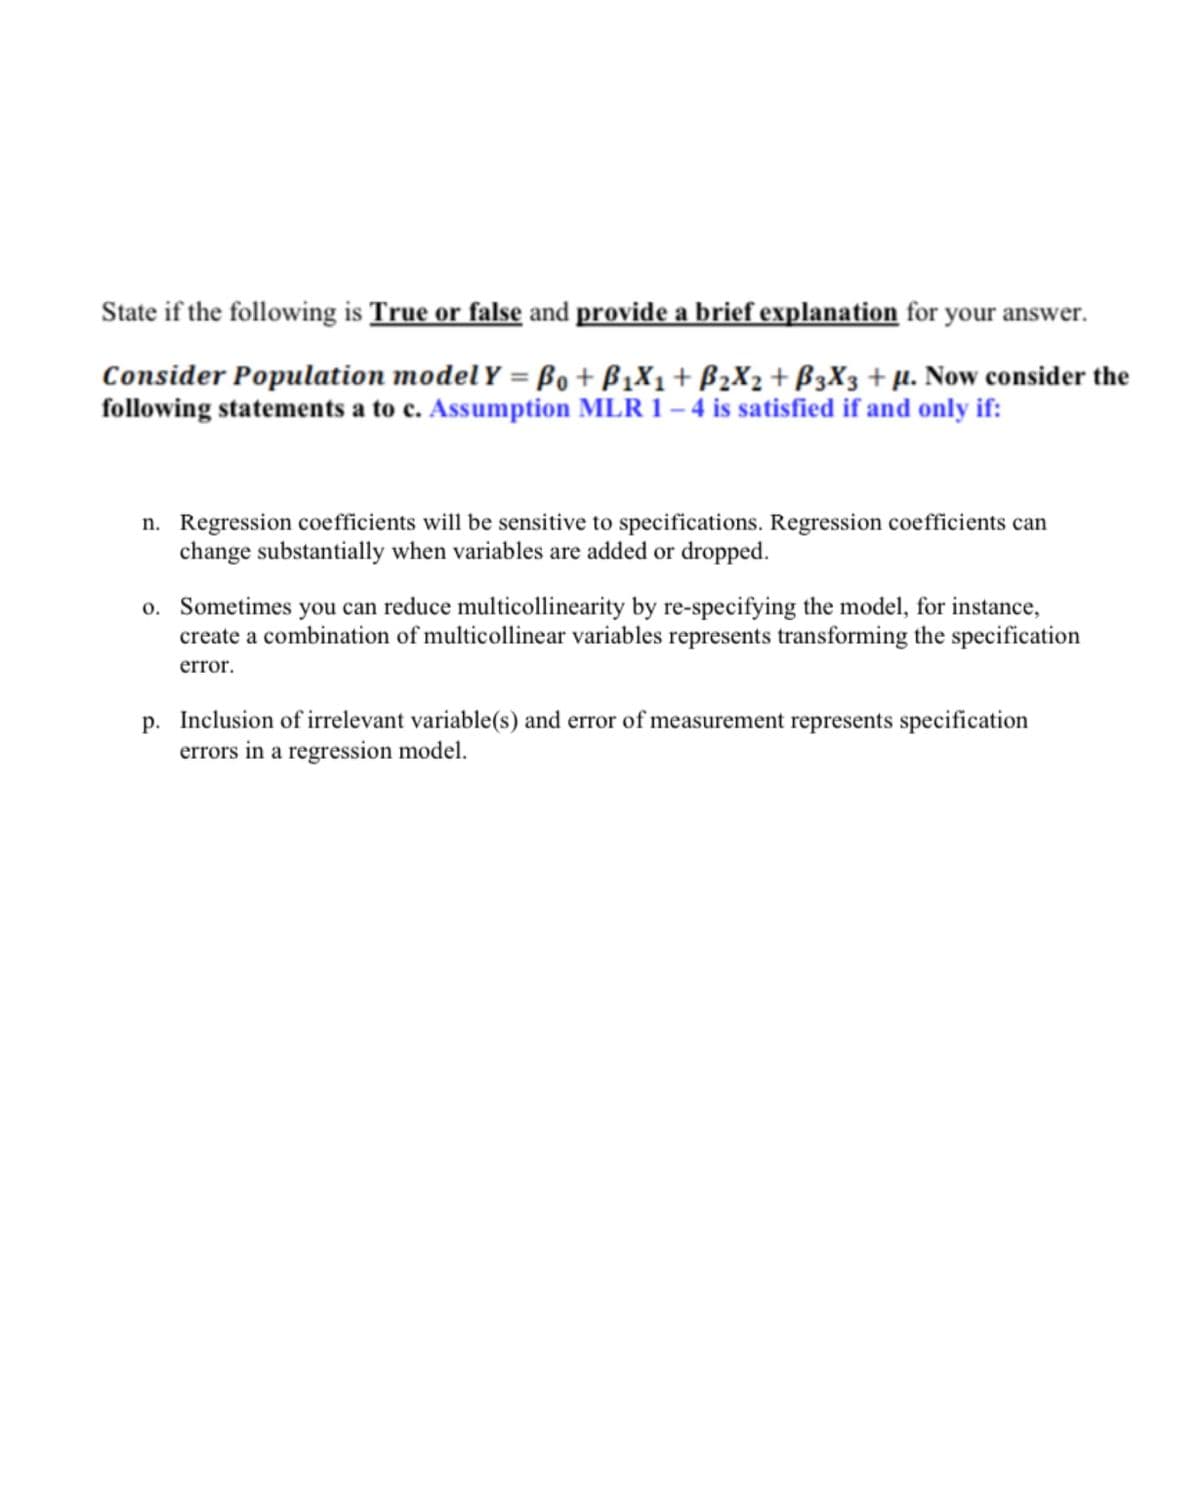 State if the following is True or false and provide a brief explanation for your answer.
Consider Population model Y = B0 + B1X1+ B2X2 + B3X3 + µ. Now consider the
following statements a to c. Assumption MLR 1 – 4 is satisfied if and only if:
n. Regression coefficients will be sensitive to specifications. Regression coefficients can
change substantially when variables are added or dropped.
o. Sometimes you can reduce multicollinearity by re-specifying the model, for instance,
create a combination of multicollinear variables represents transforming the specification
error.
p. Inclusion of irrelevant variable(s) and error of measurement represents specification
errors in a regression model.
